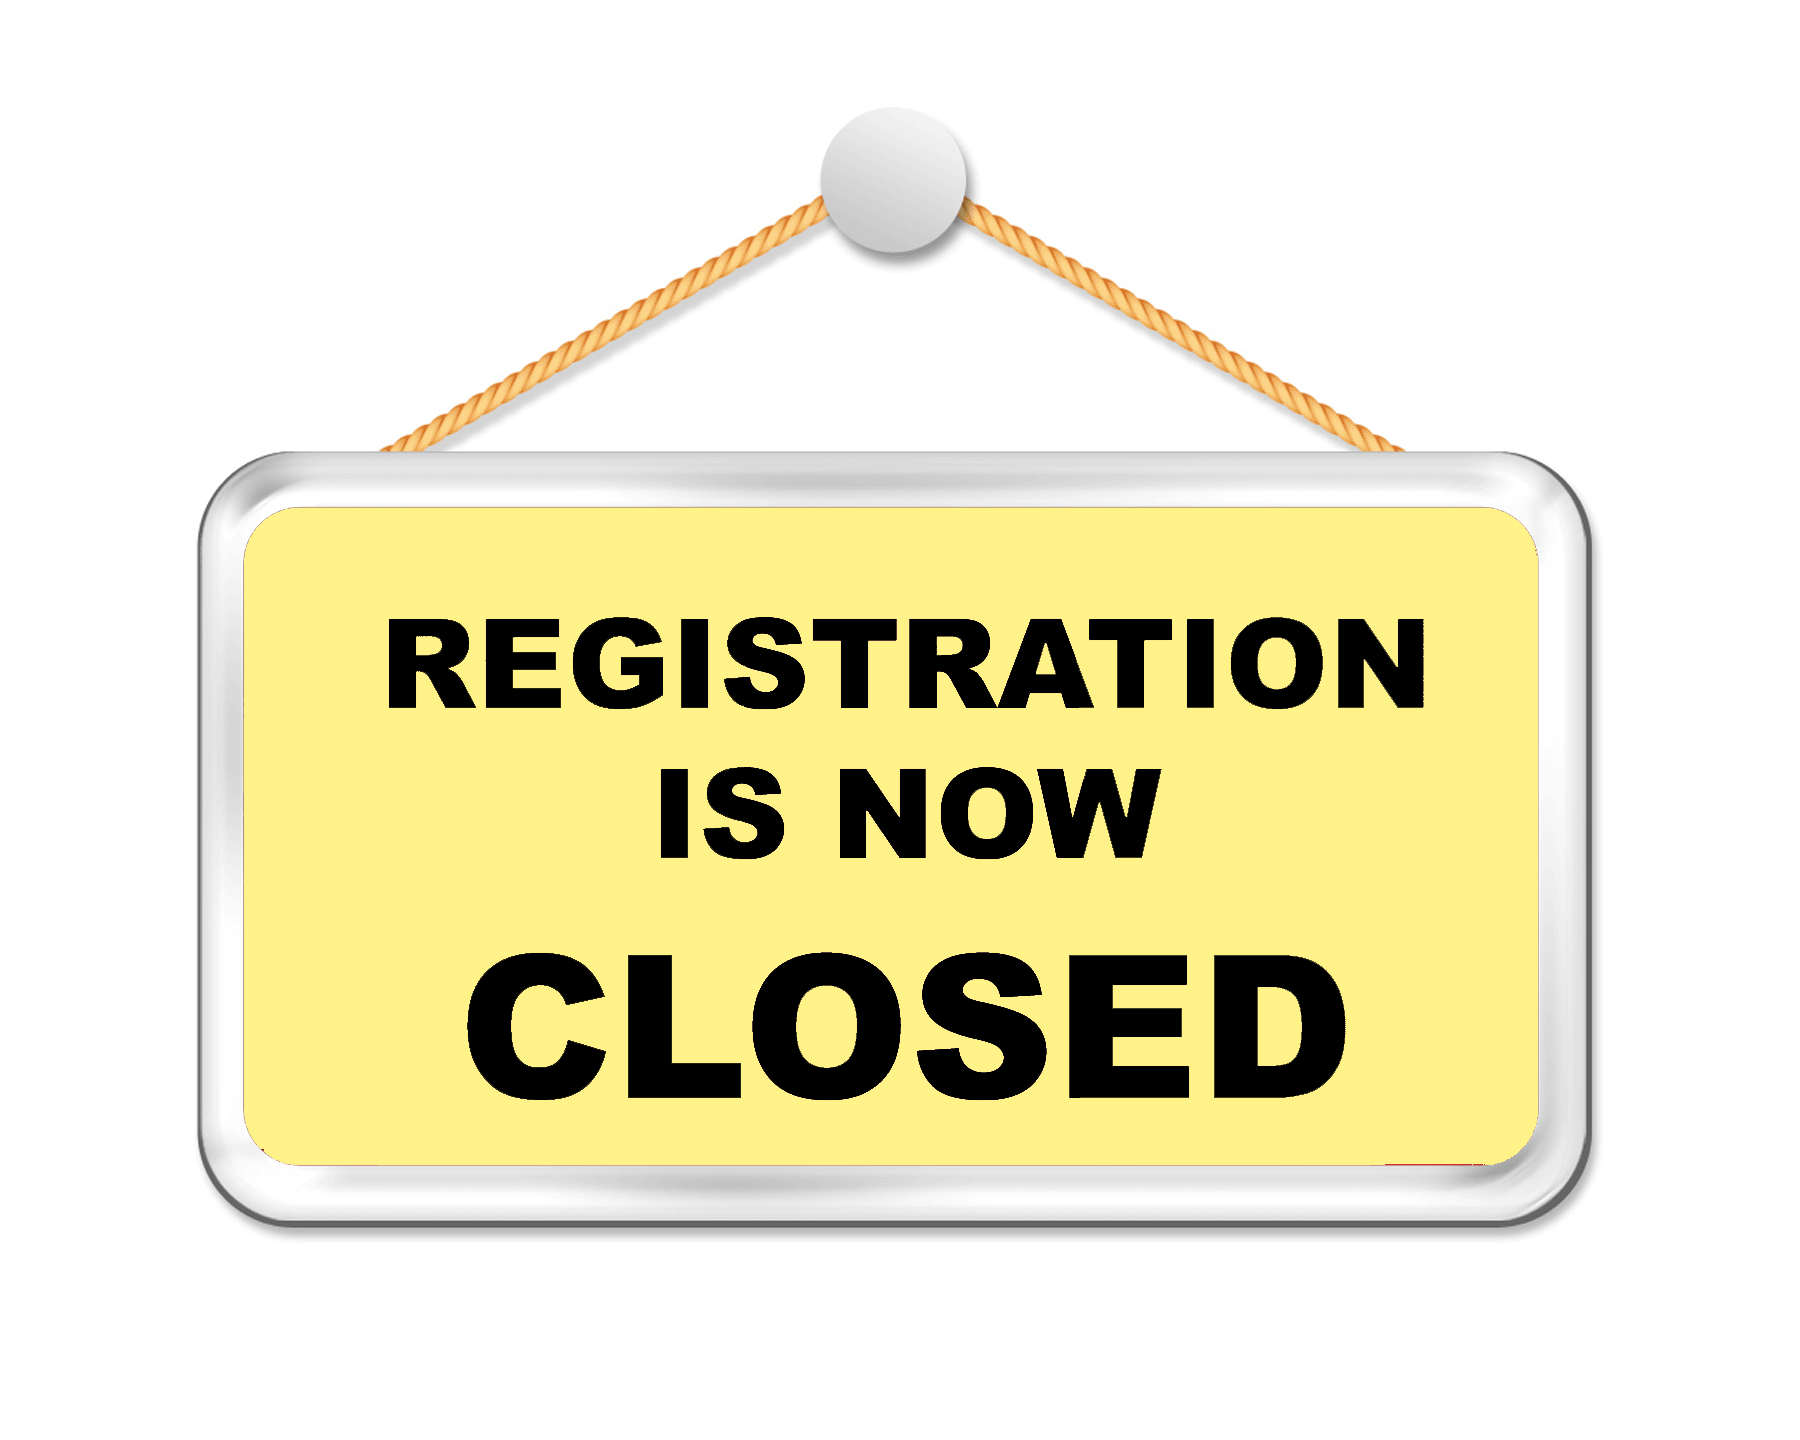 Registration is now closed